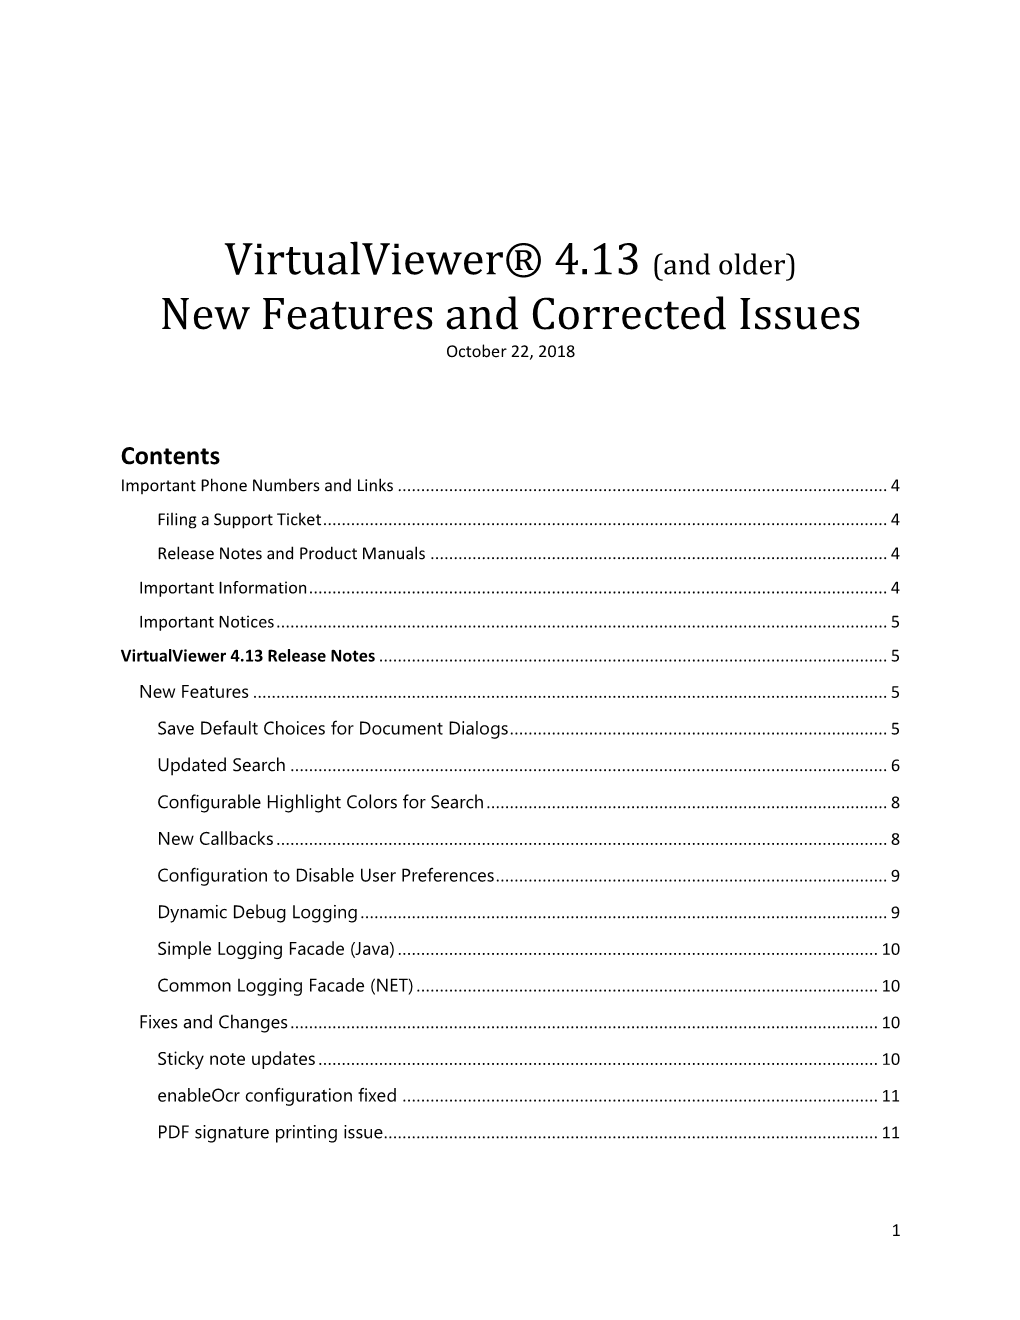 Virtualviewer® 4.13 (And Older) New Features and Corrected Issues October 22, 2018